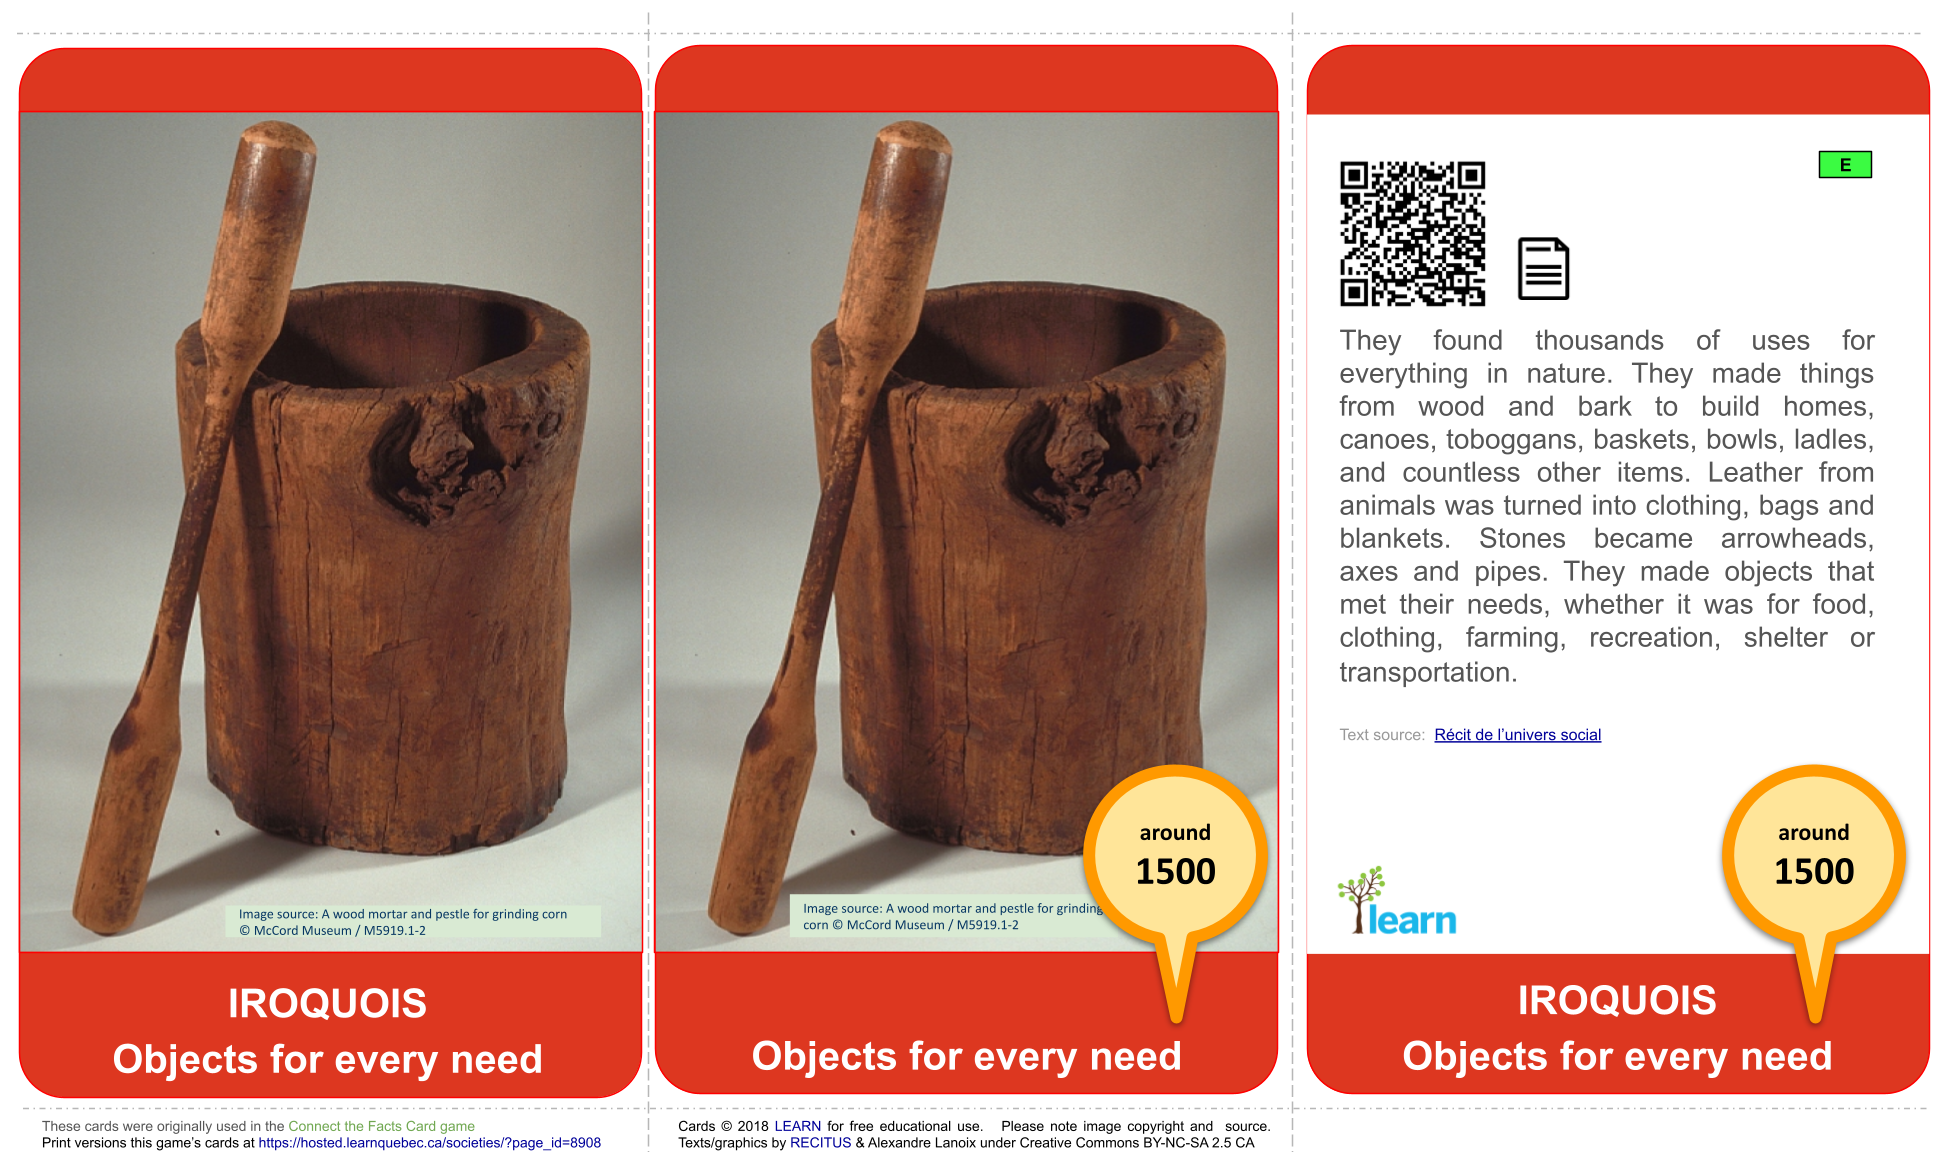 Iroquois: Objects for every need